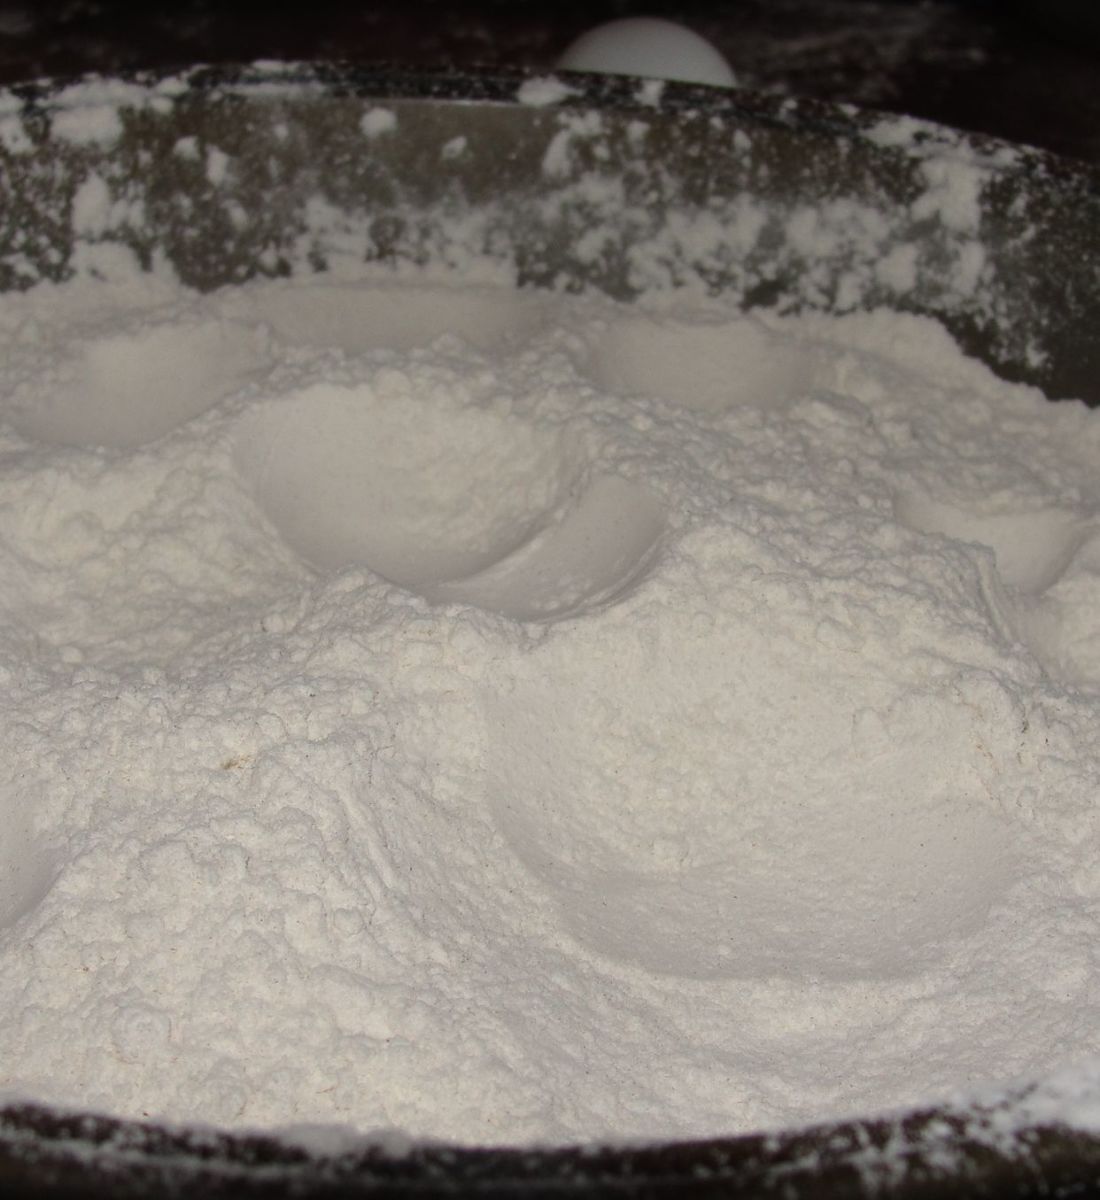 Creating the moon's surface using "crater" balls and flour